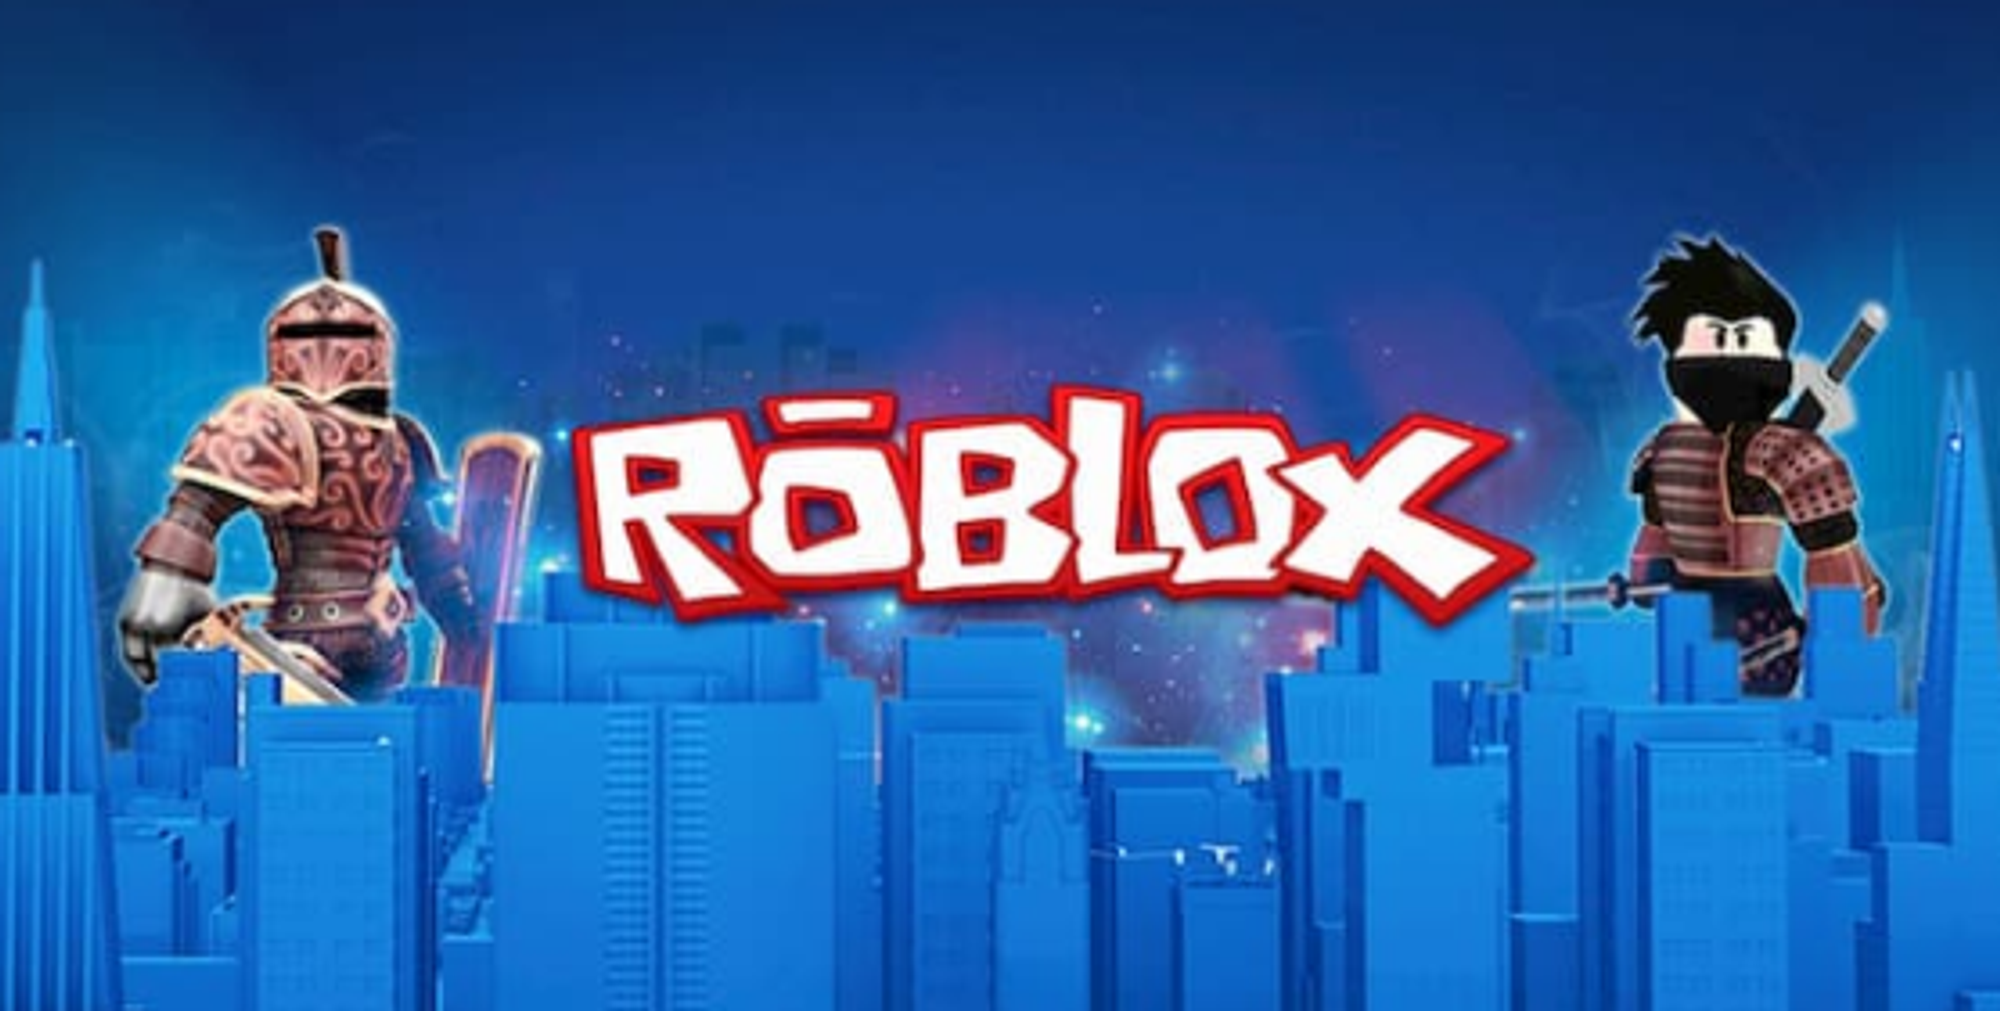 Roblox Robux Codes How To Get Free Robux In Roblox 2020 - bugmenot roblox 2019 robux offers